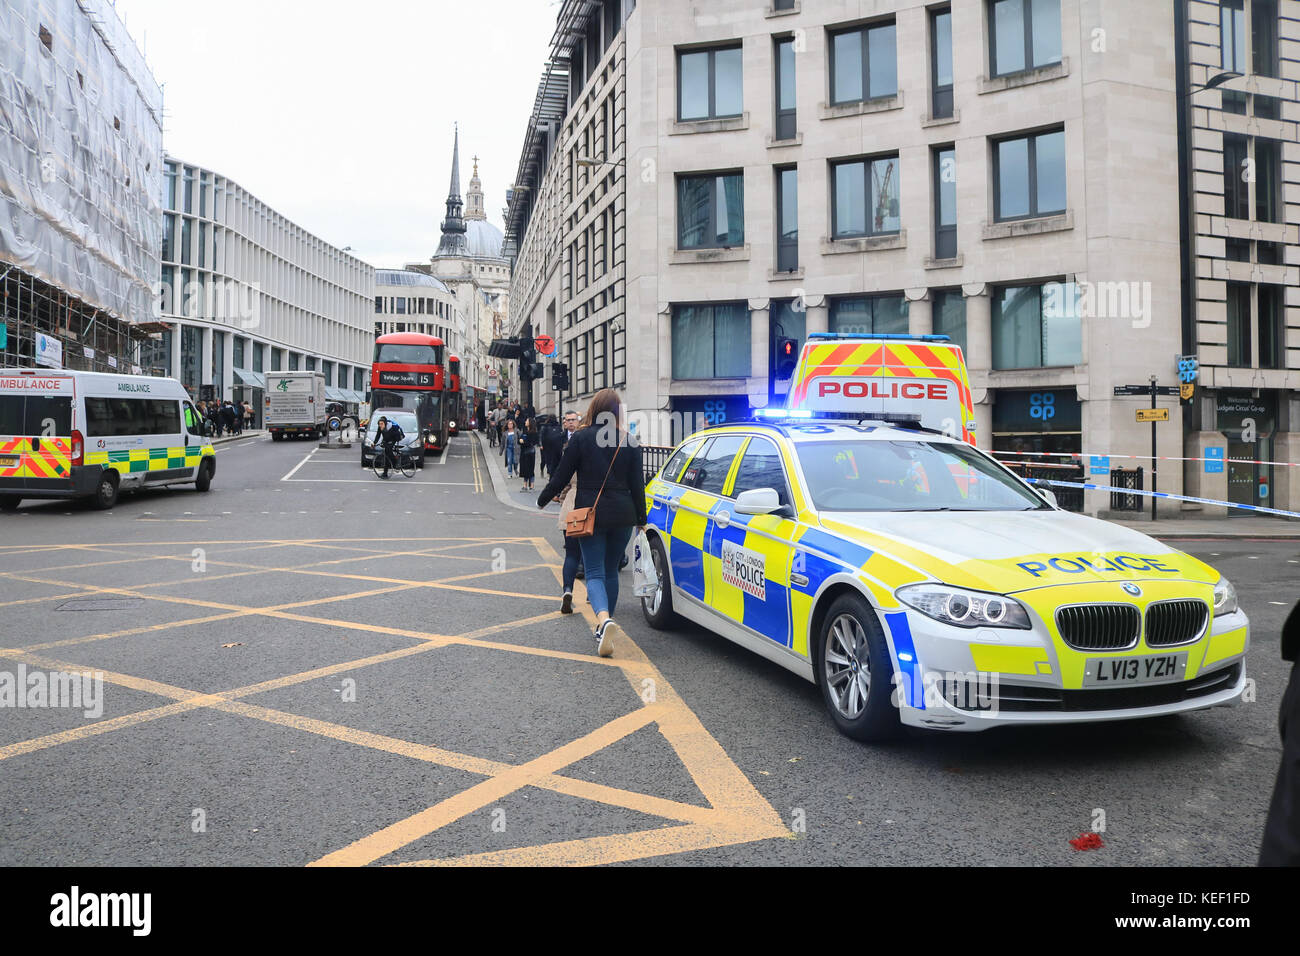 London, UK. 20th Oct, 2017. City of London Police have cordoned the area around  Ludgate Circus,   after a pedestrian was  hit and killed by a van near the junction of Fleet Street and New Bridge Street. The area which has  been notorious for previous deaths because of its large junctions and lack of pedestrian crossings. Credit: amer ghazzal/Alamy Live News Stock Photo